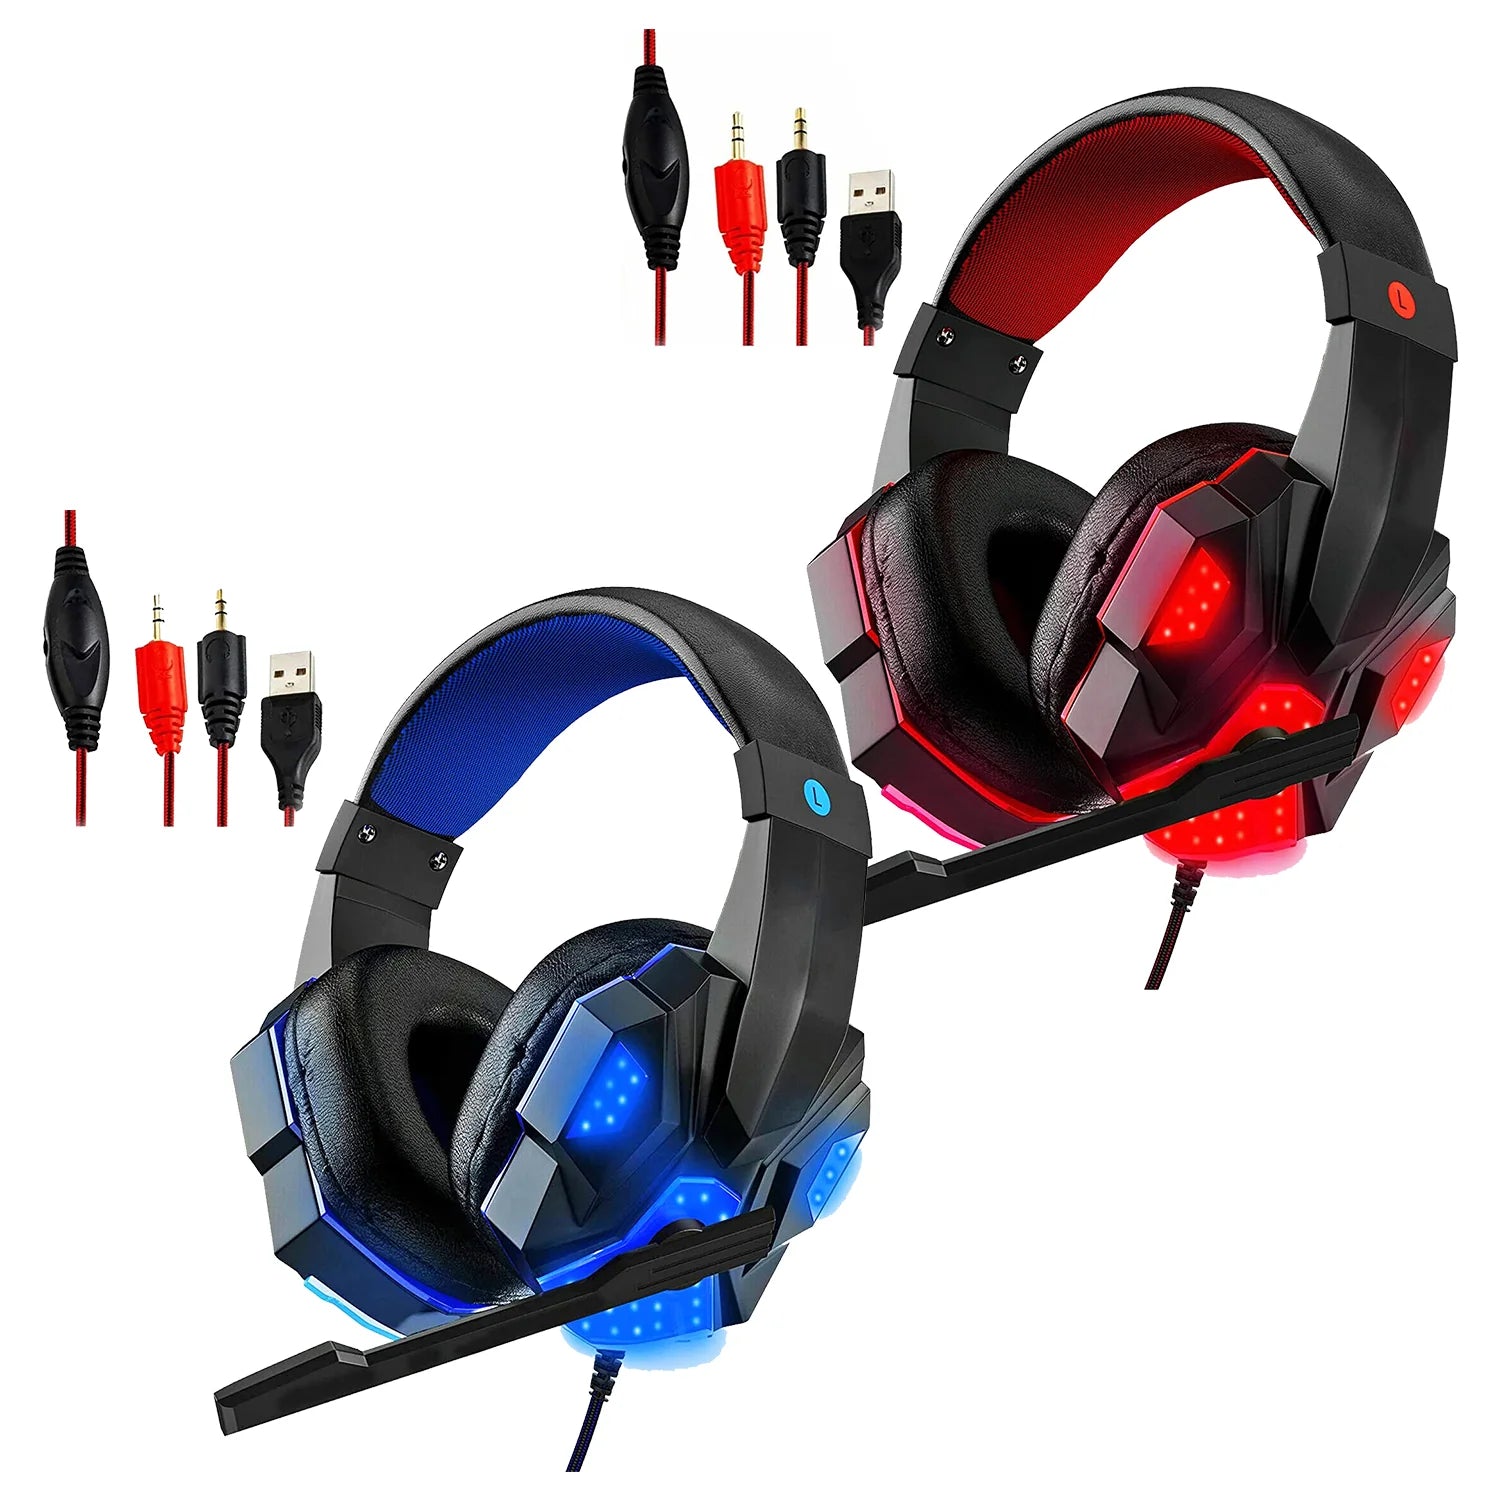 5 Core Gaming Headset 2 Pieces Blue Red PC Gaming Xbox Headset Premium Gaming Wired Headsets with LED Light Mic Gaming Accessories for Console Laptop Computer Games Perfect Gamer Gifts - HDP GM1 R+B